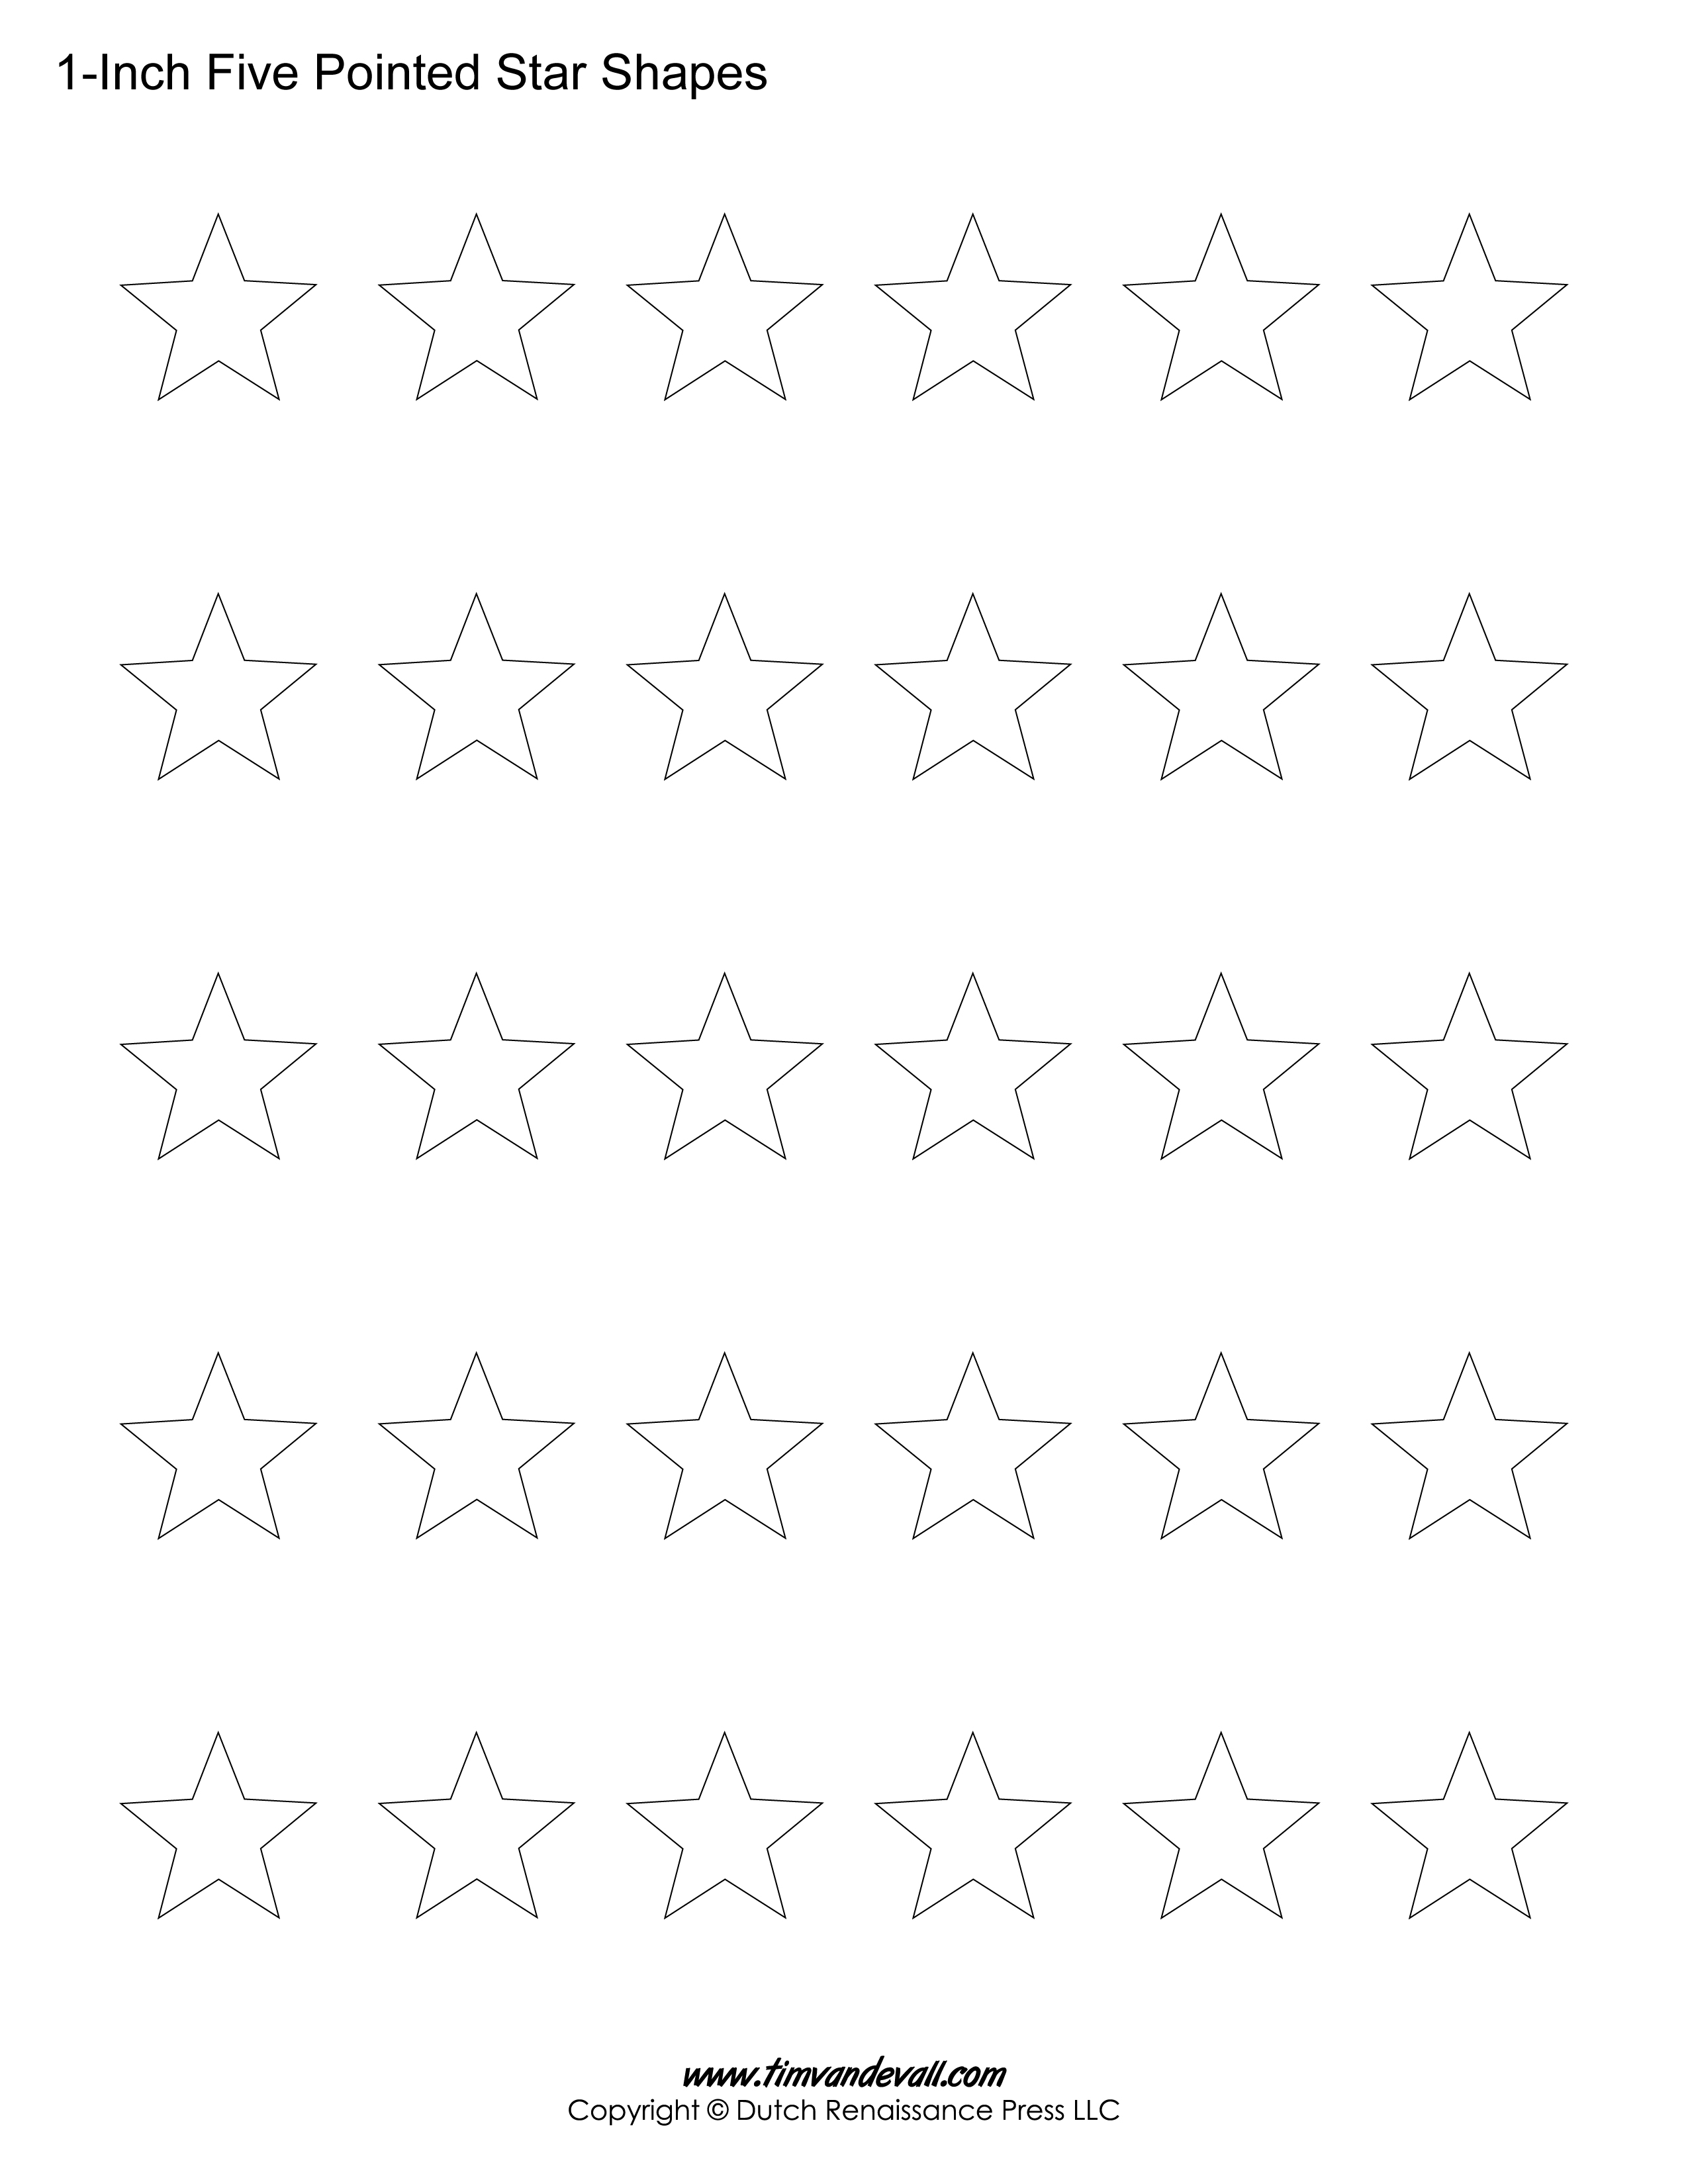 Printable Five Pointed Star Templates Blank Shape PDFs